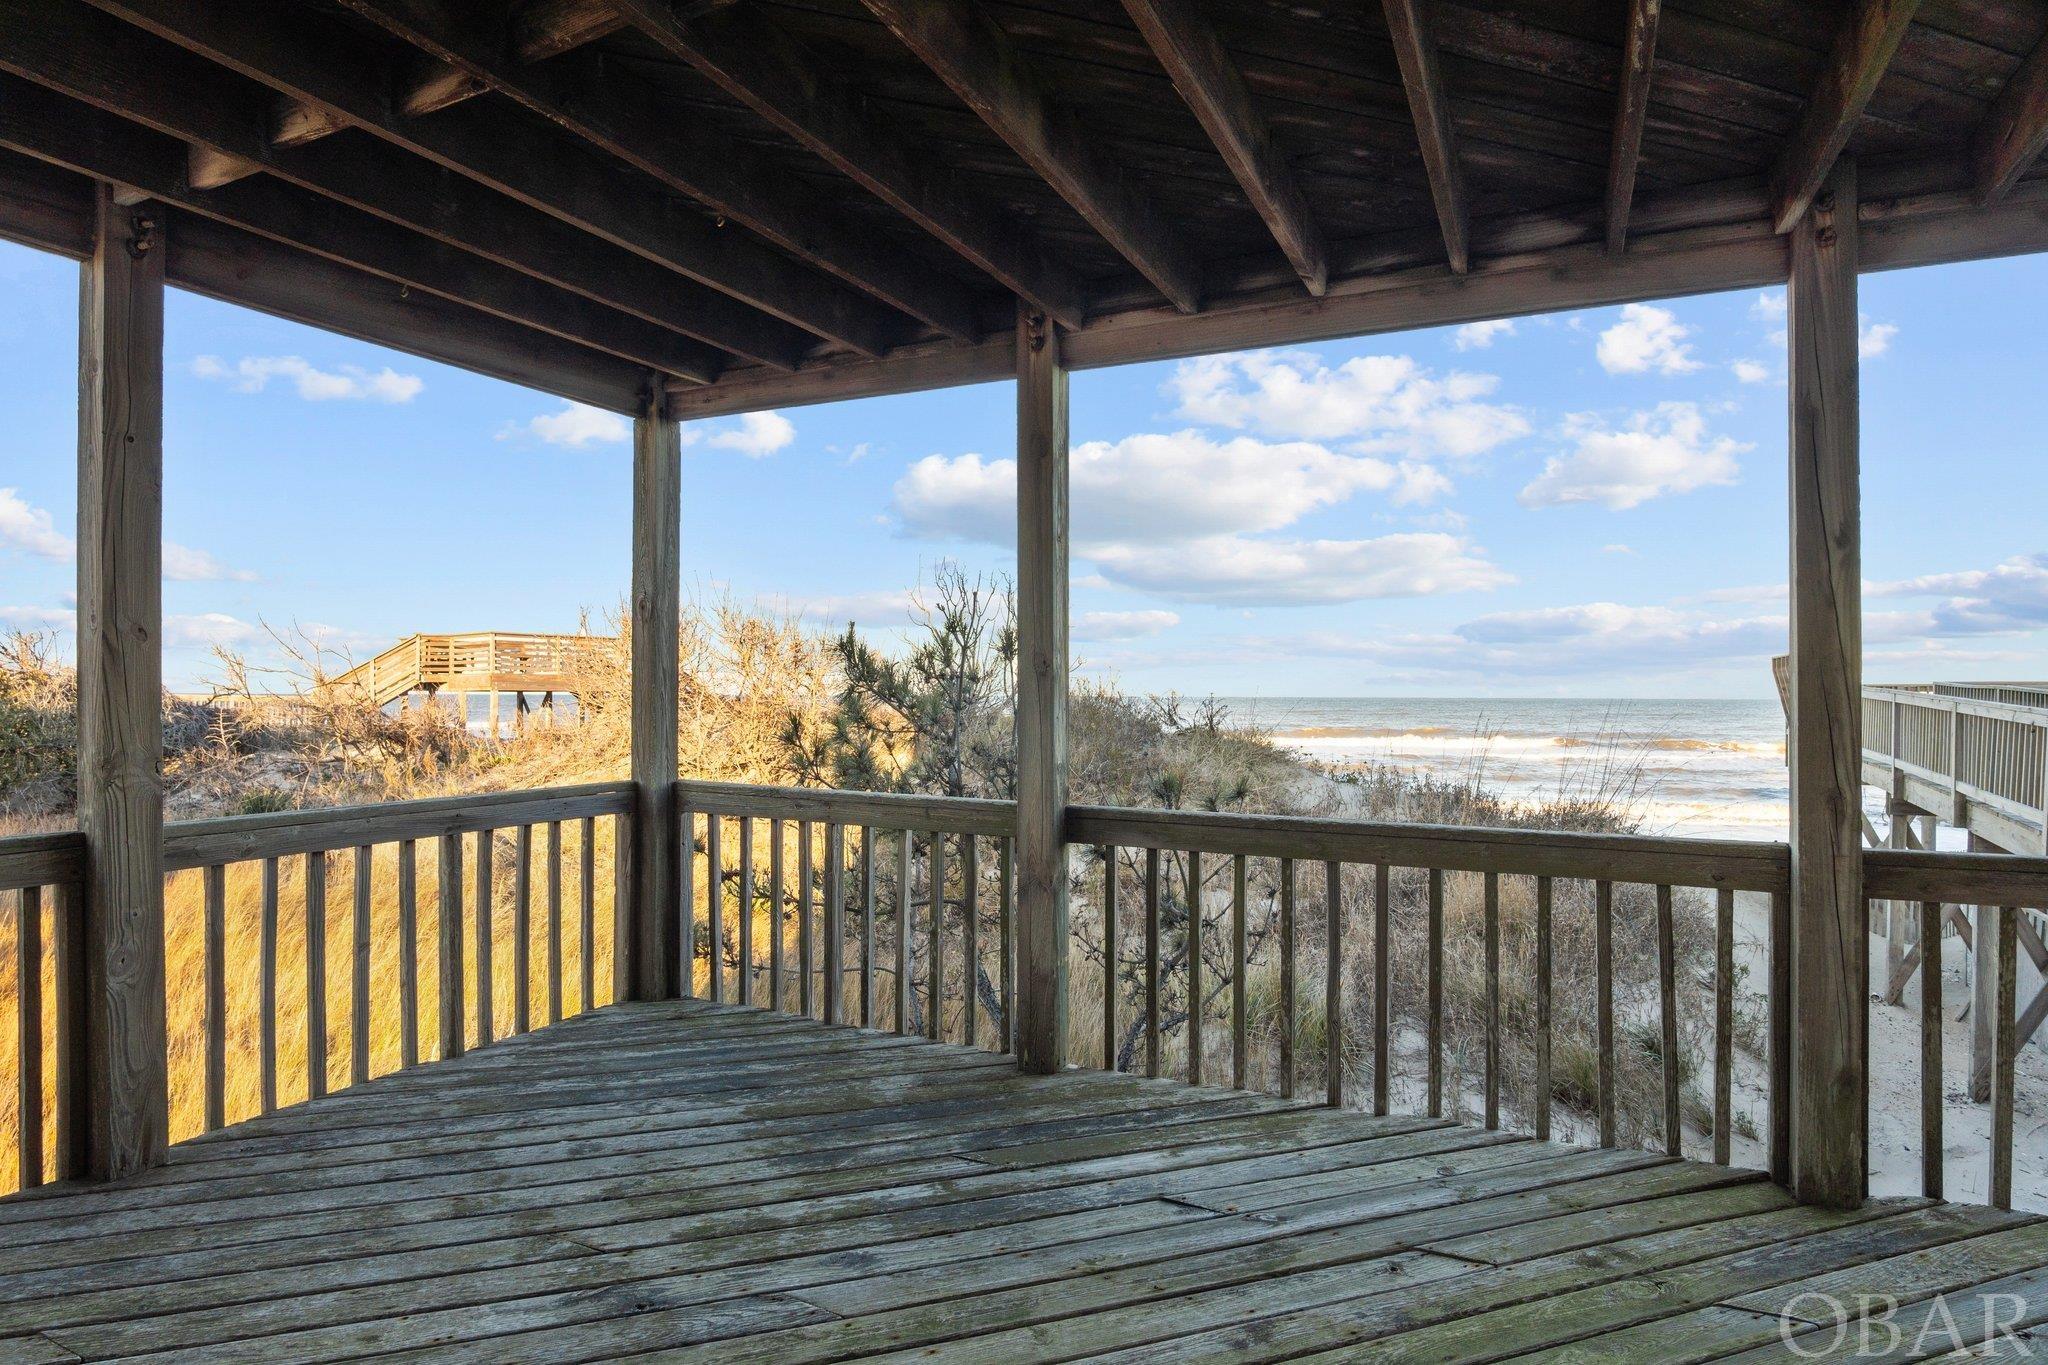 485 Land Fall Court, Corolla, NC 27927, 4 Bedrooms Bedrooms, ,4 BathroomsBathrooms,Residential,For sale,Land Fall Court,124456